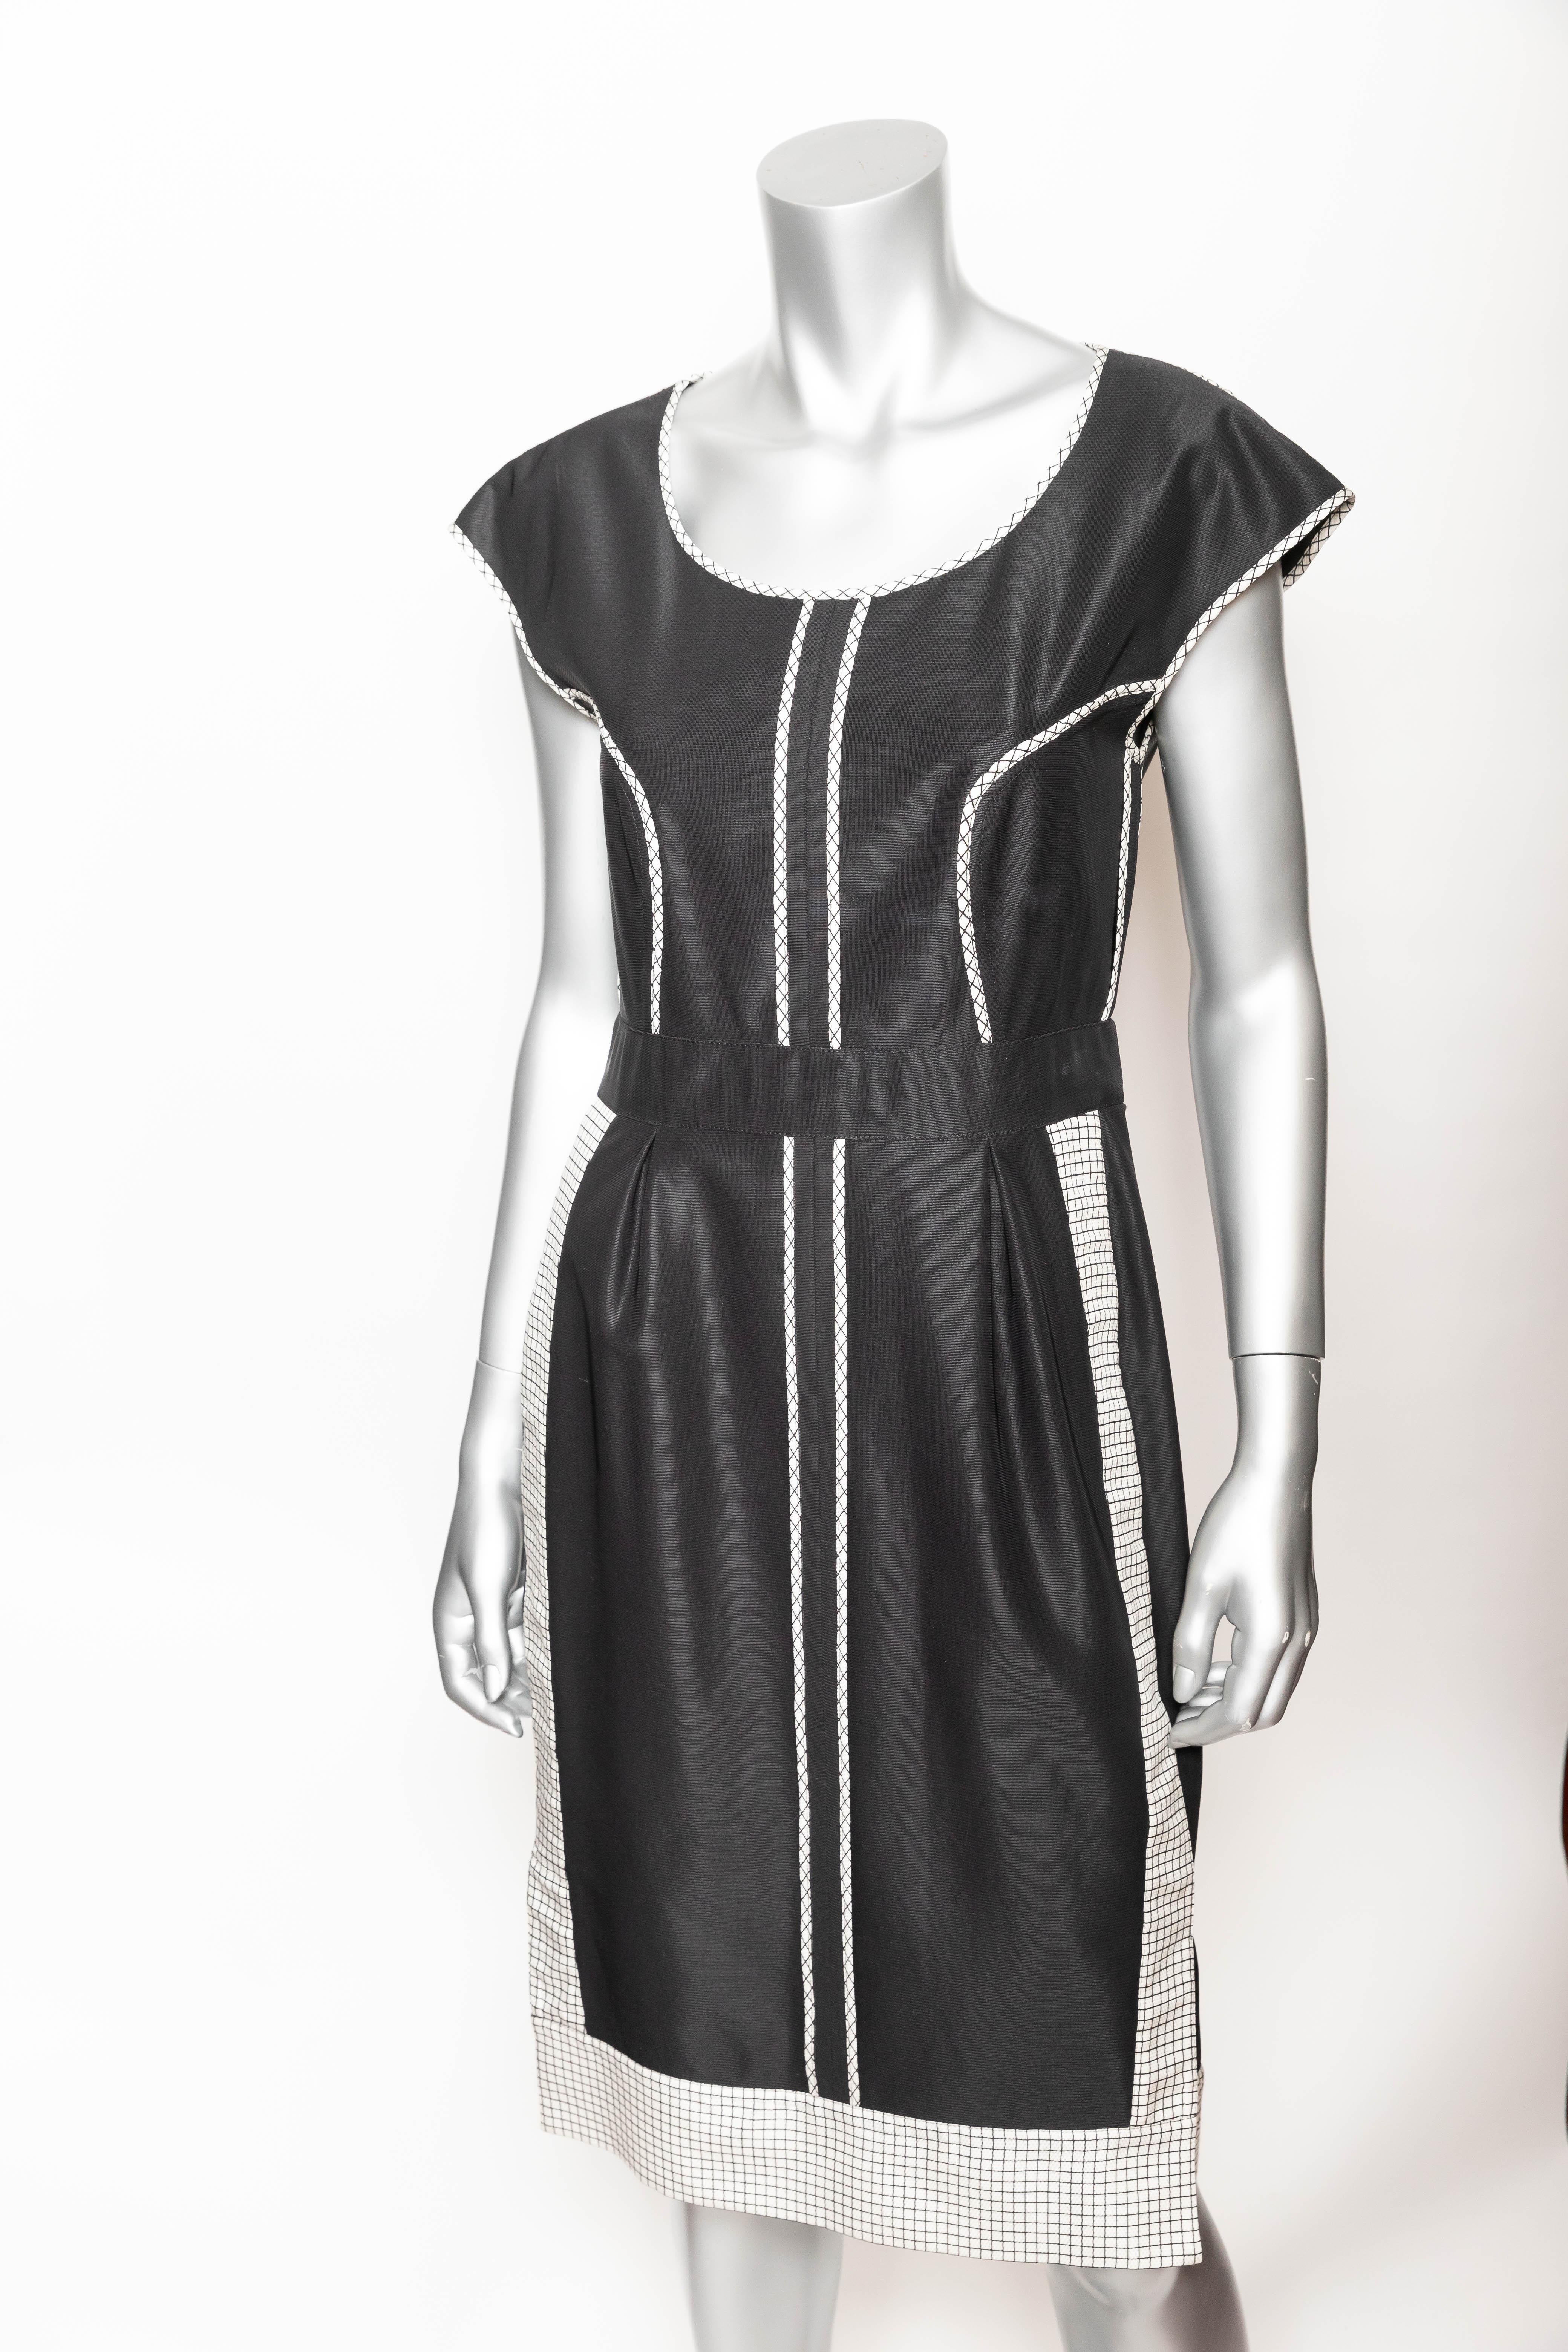 Very chic Fendi dress in black and white.
Side slits to hem with back zip.
Excellent condition.